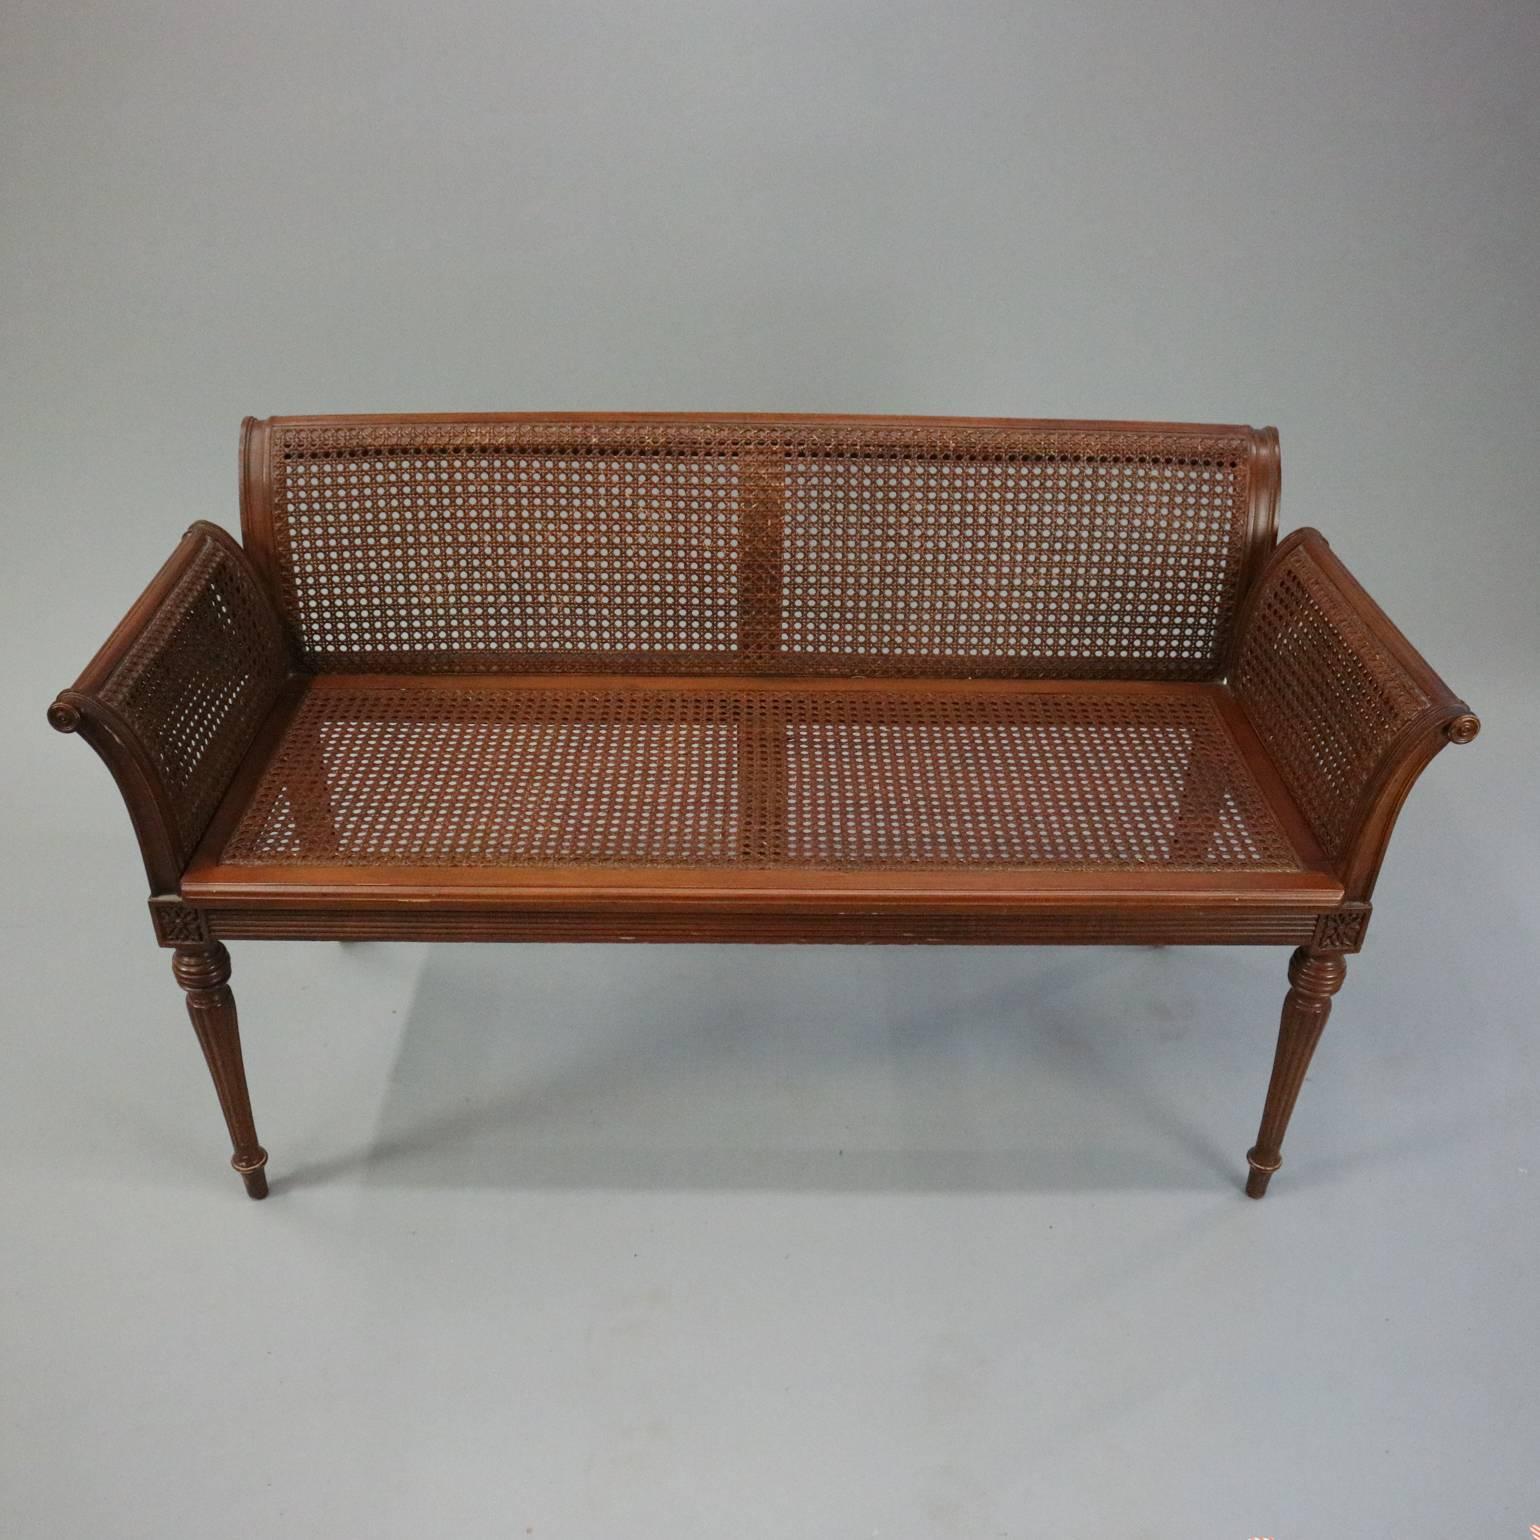 19th Century Antique French Classical Carved Mahogany Caned Bench, circa 1840